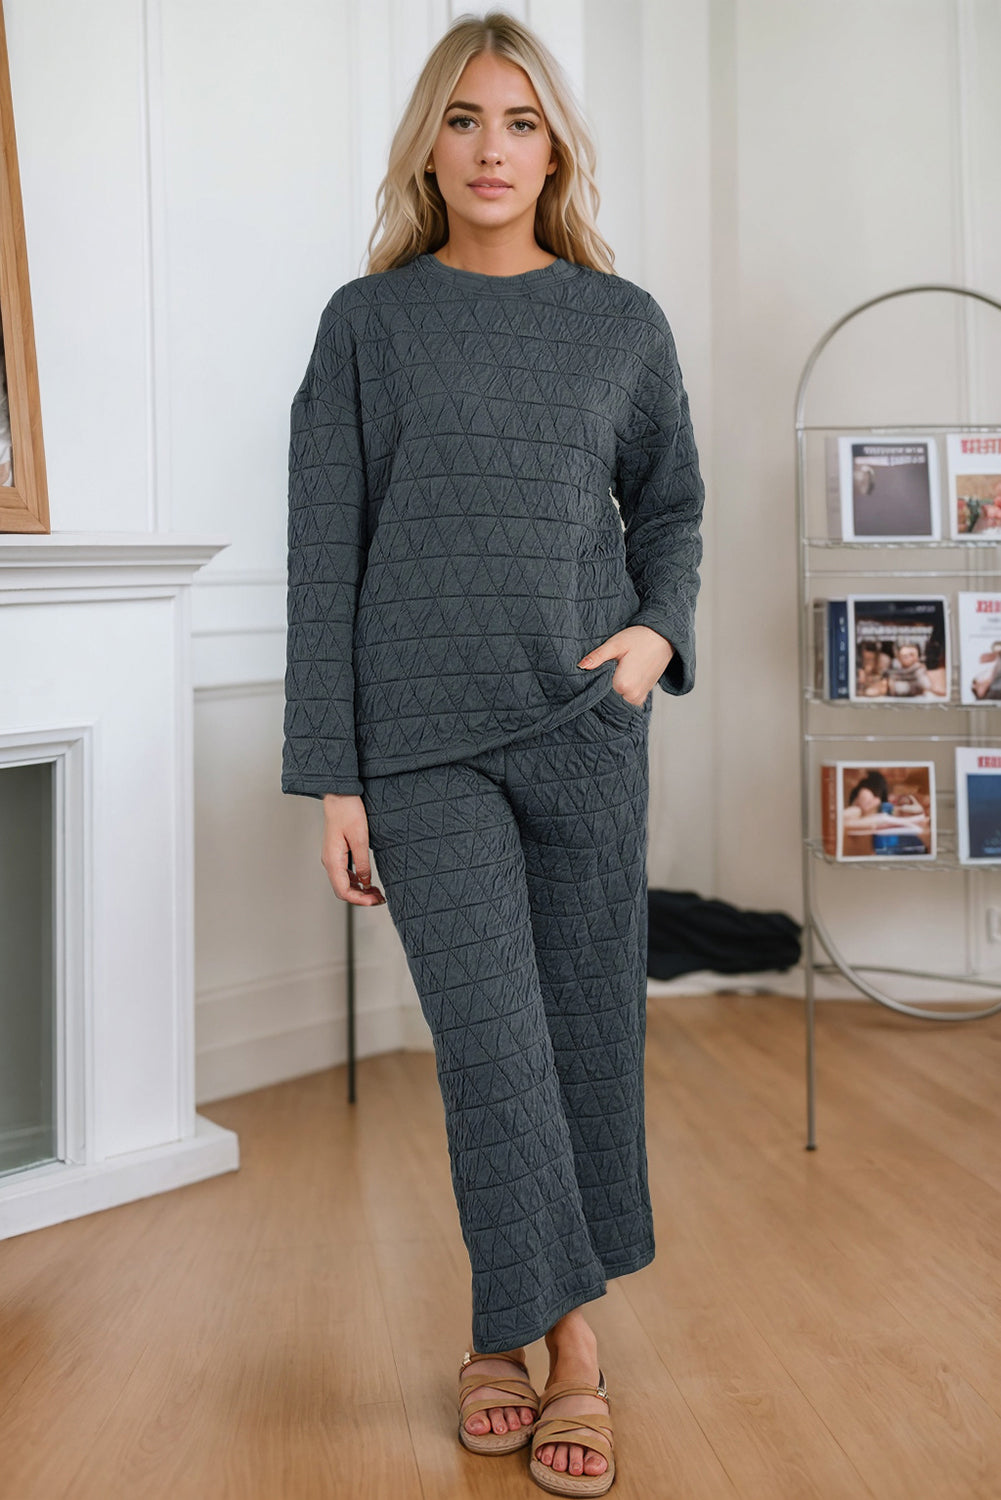 Round Neck Top and Pocketed  Pants Lounge Set - Tophatter Deals and Online Shopping - Electronics, Jewelry, Beauty, Health, Gadgets, Fashion - Tophatter's Discounts & Offers - tophatters